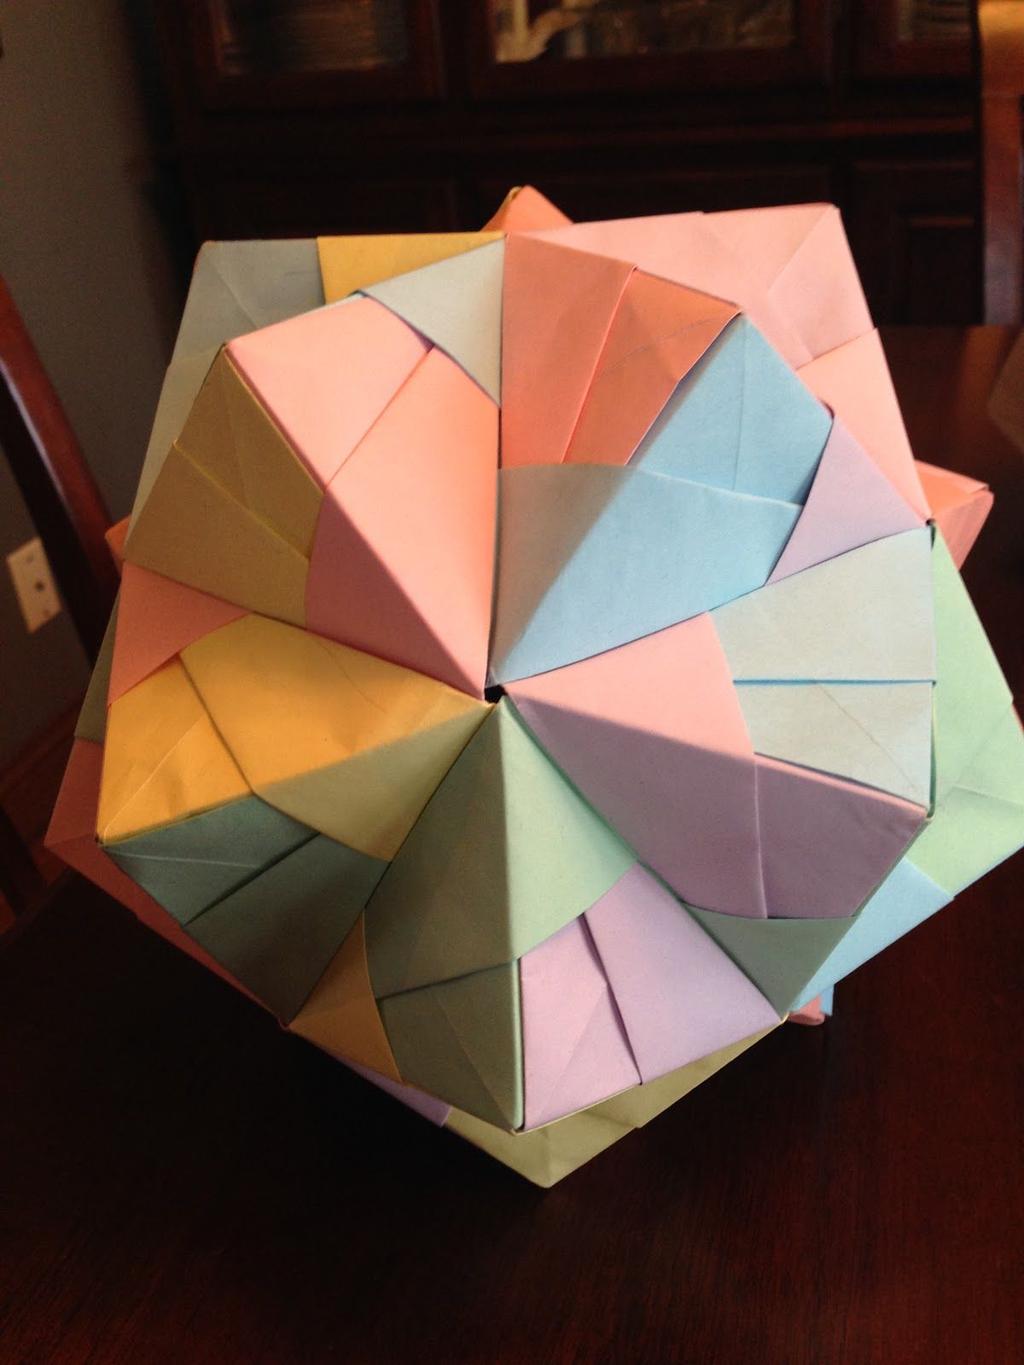 Colored Triangular hexahedron: Three pieces of paper one each of three different colors https://youtu.be/pjl8w9dpq k 3a.